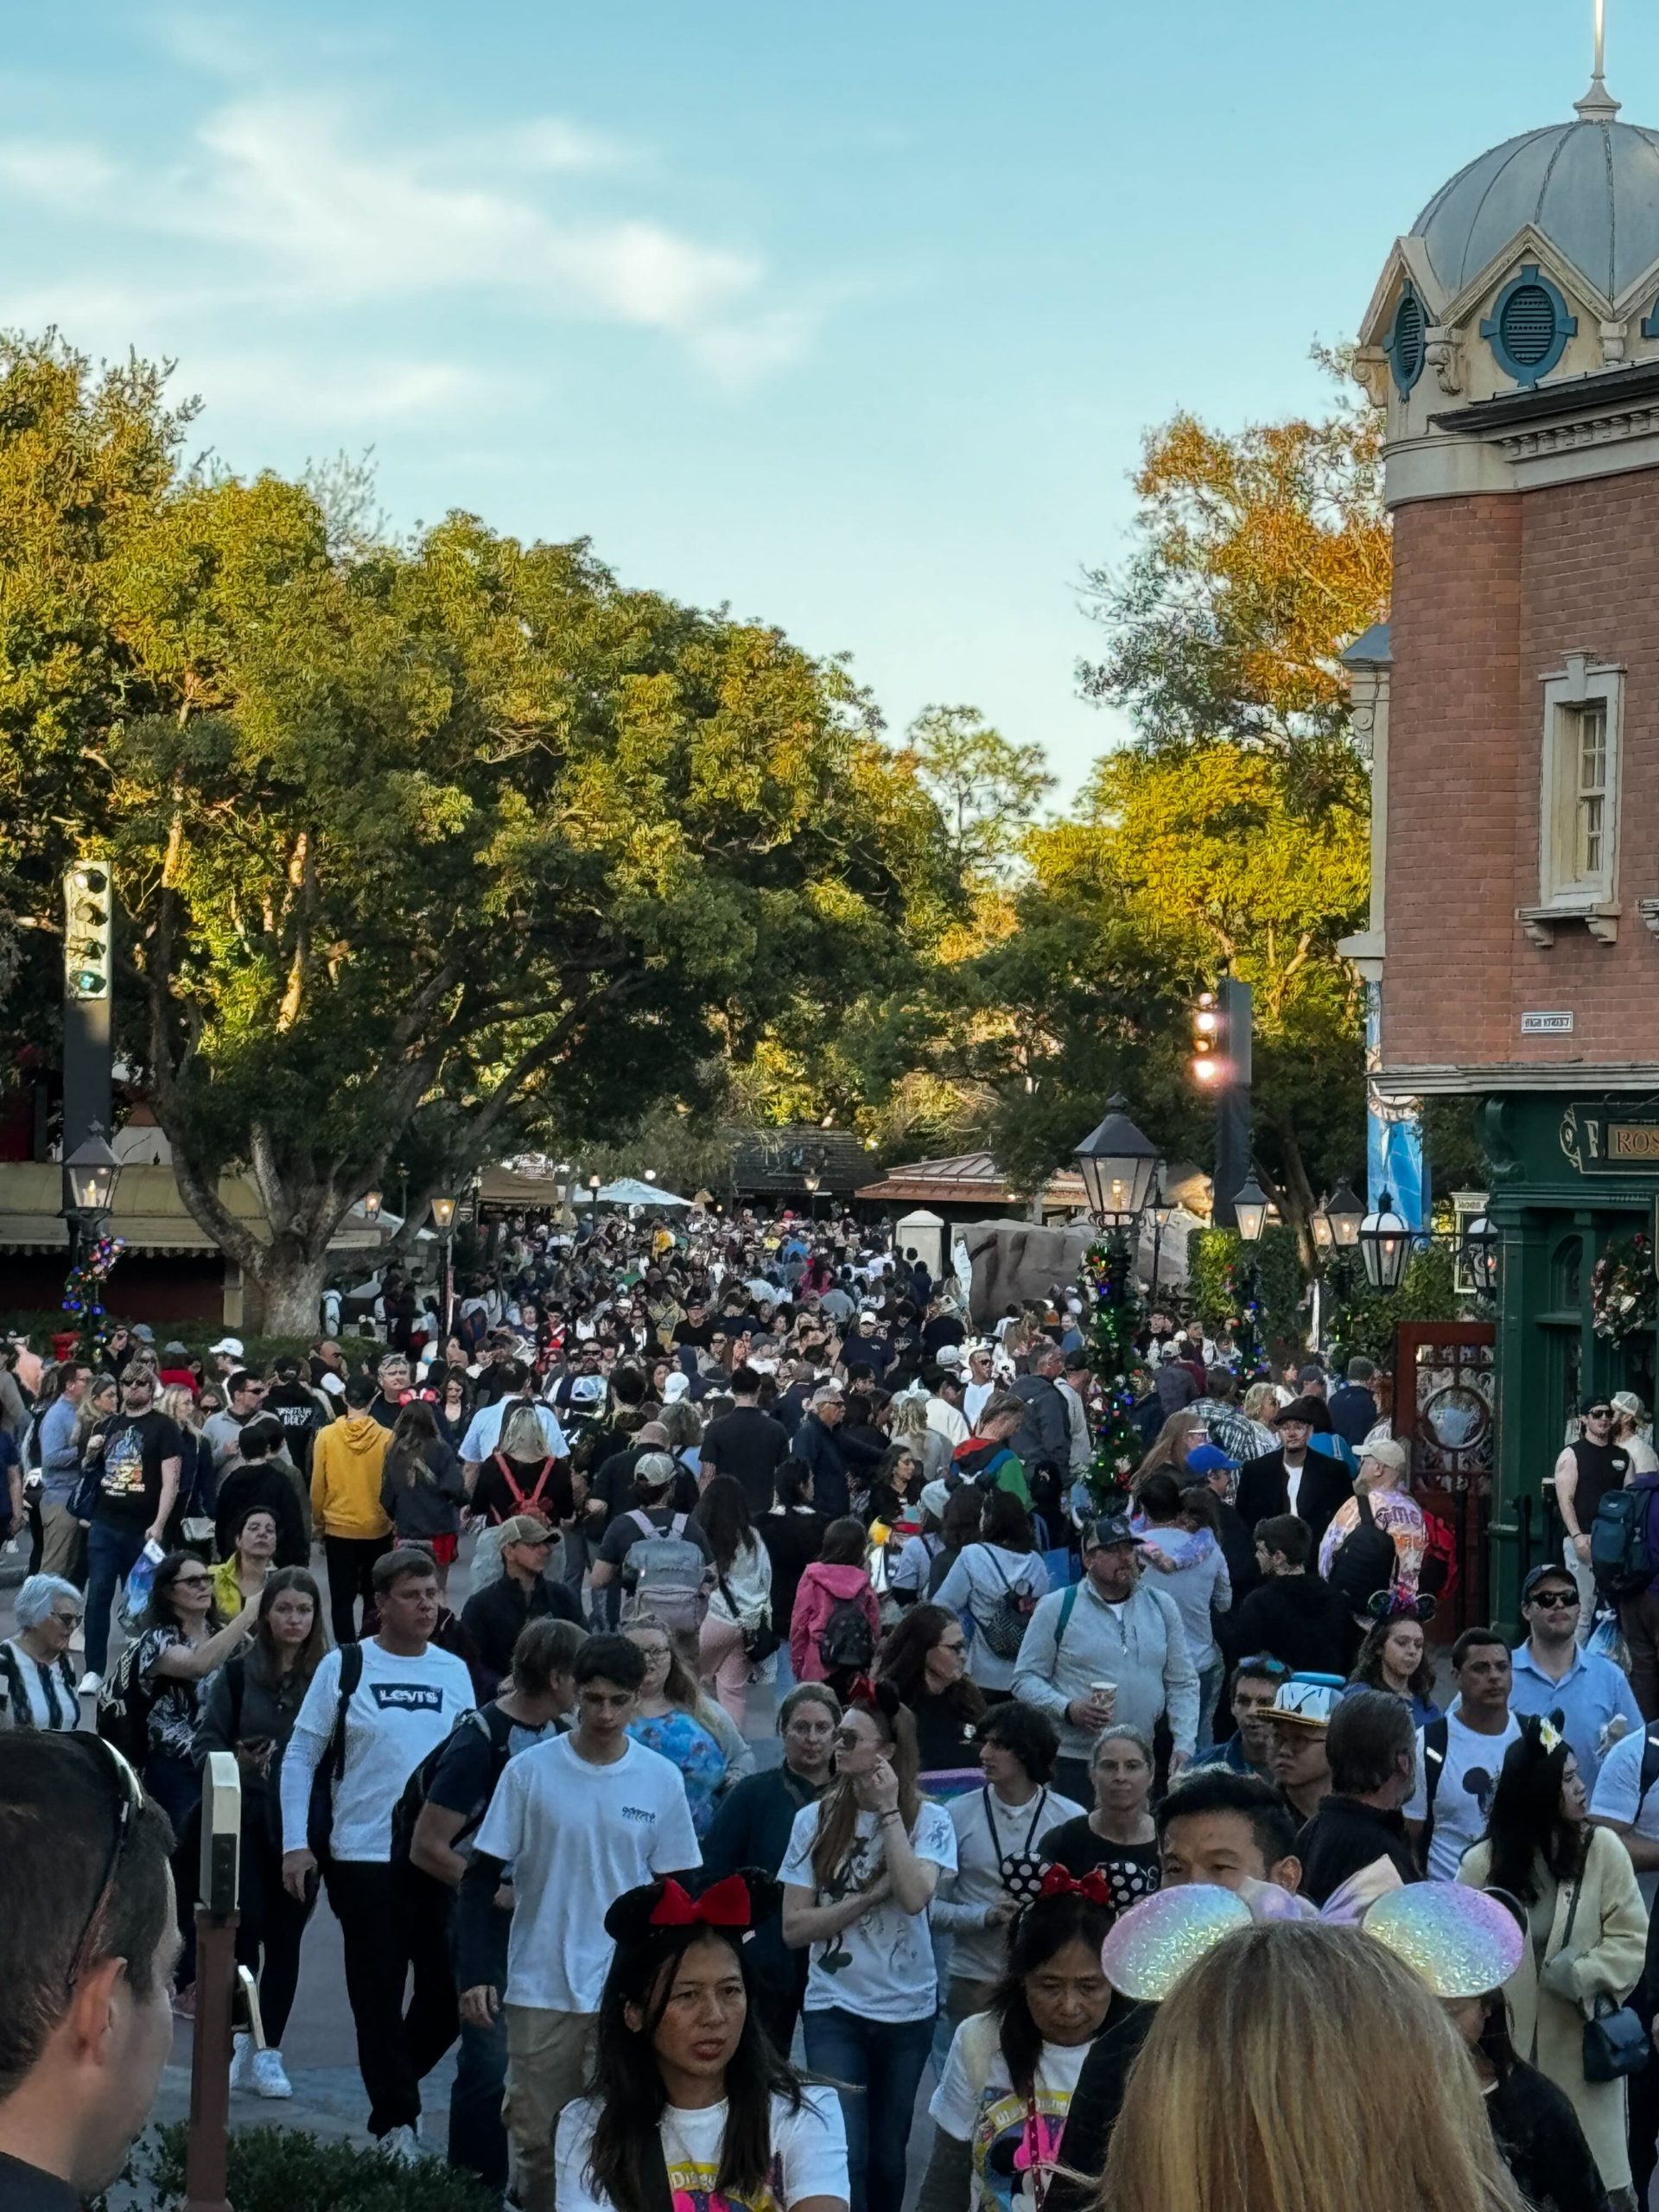 New Year's Eve crowds in World Showcase